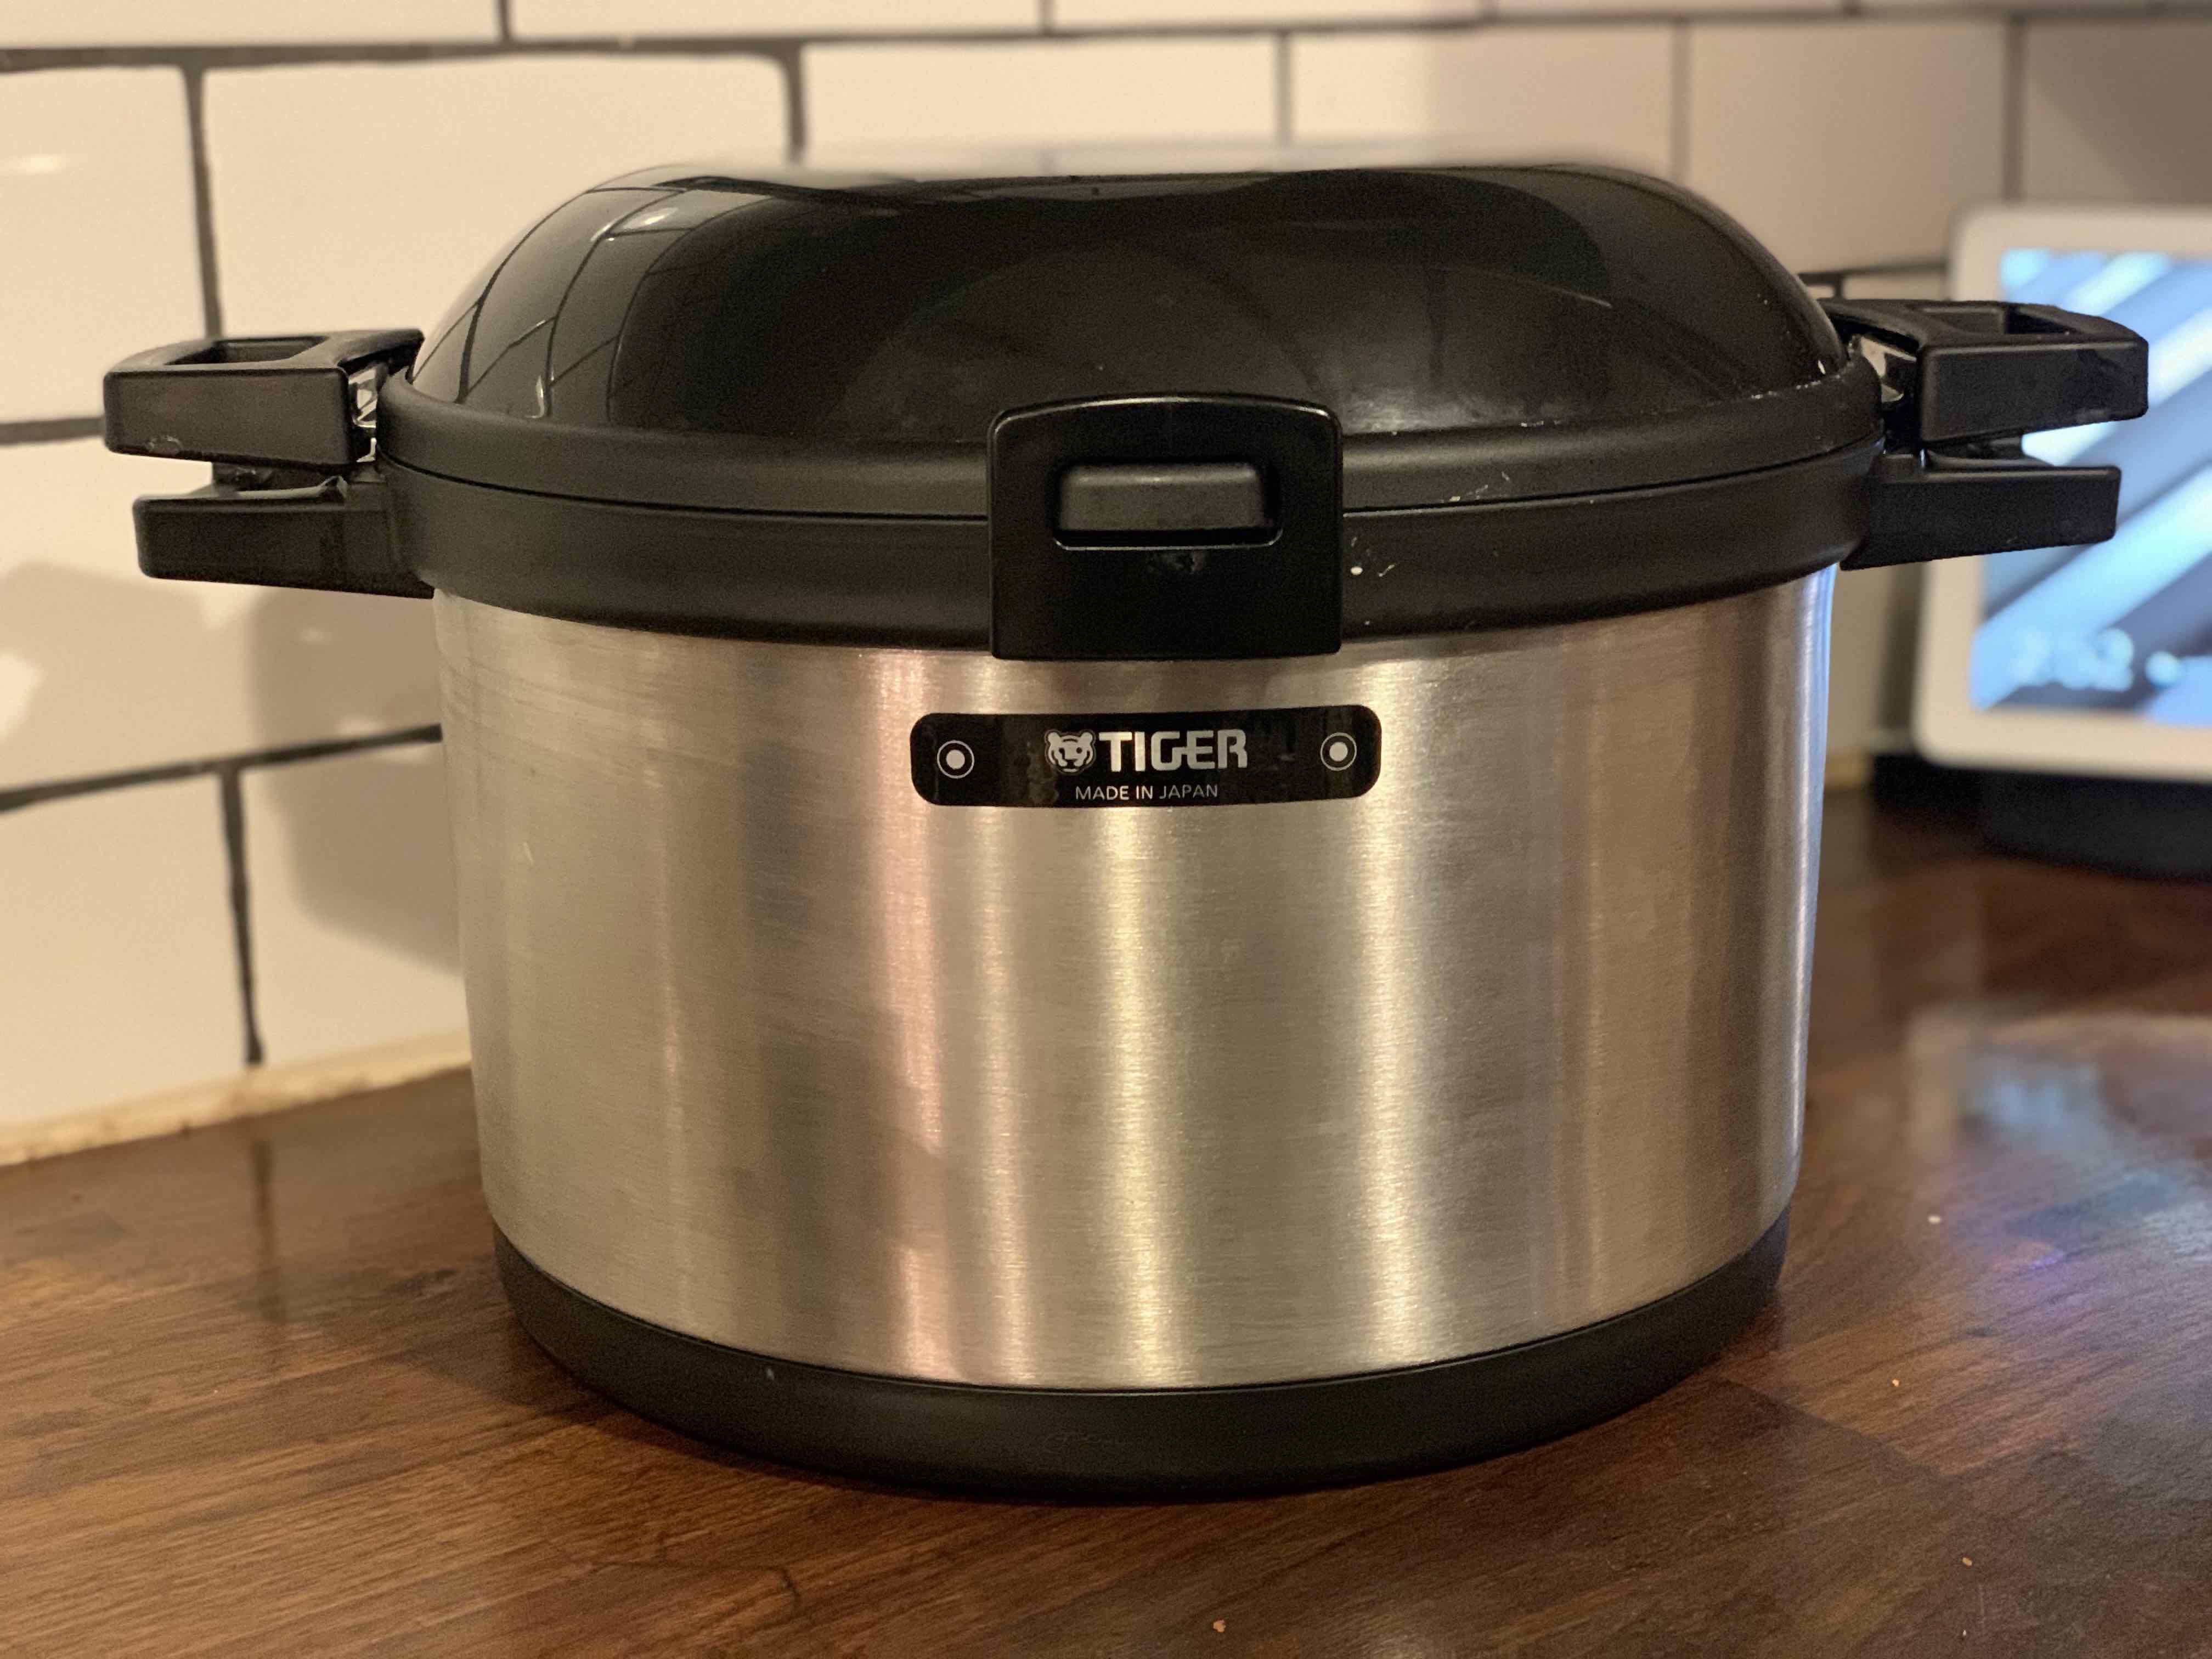 https://blog.bestbuy.ca/wp-content/uploads/2020/04/Tiger-insulated-cooker-review-copy.jpg